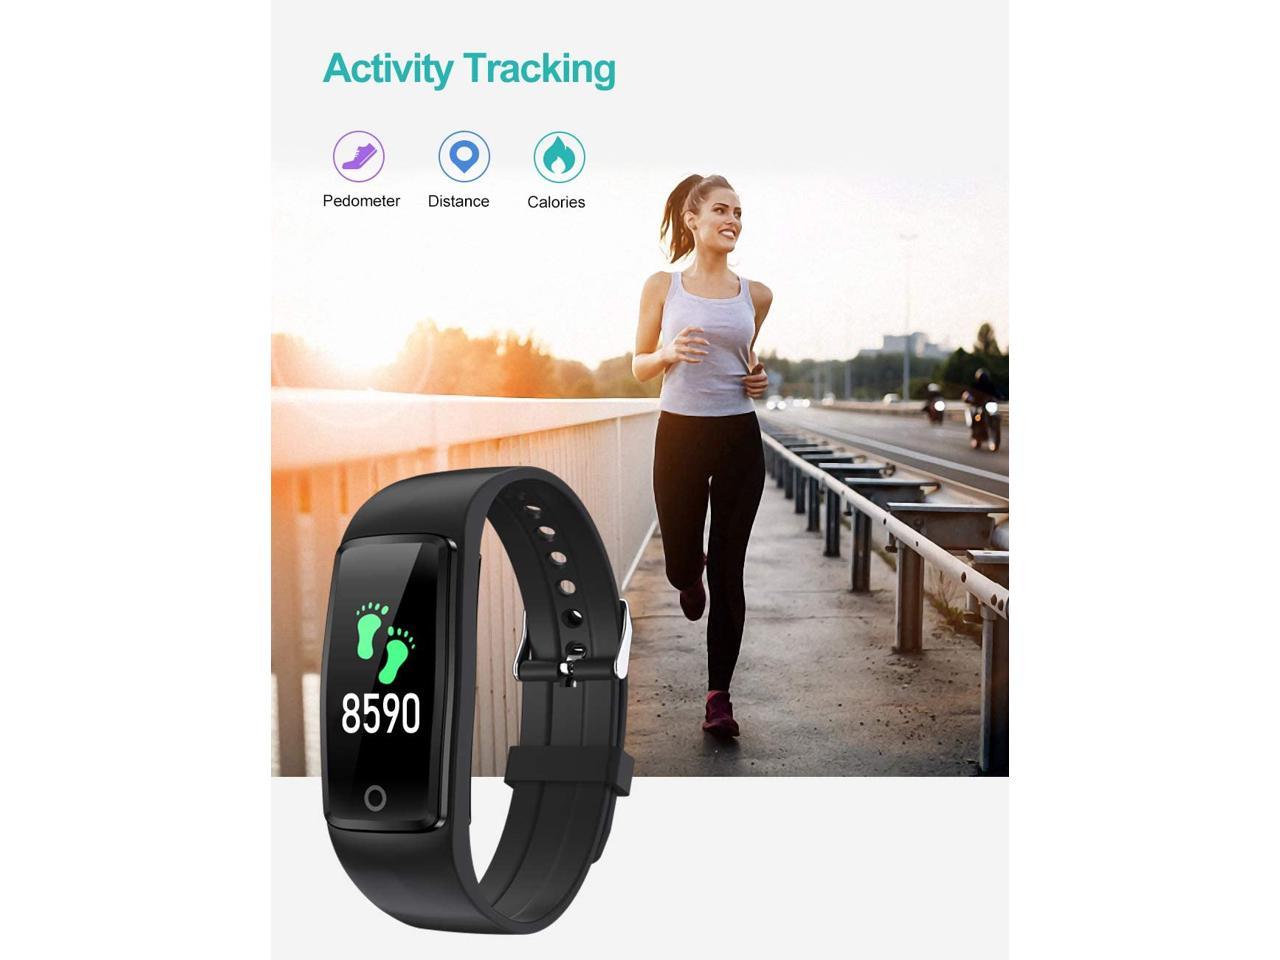 Great Gift for for Kids Teens Girls Boys Women Calories Burned Steps IP68 Waterproof Stopwatch with Pedometer ficnit Digital Non-Bluetooth Fitness Tracker Watch Distance Alarm Clock 